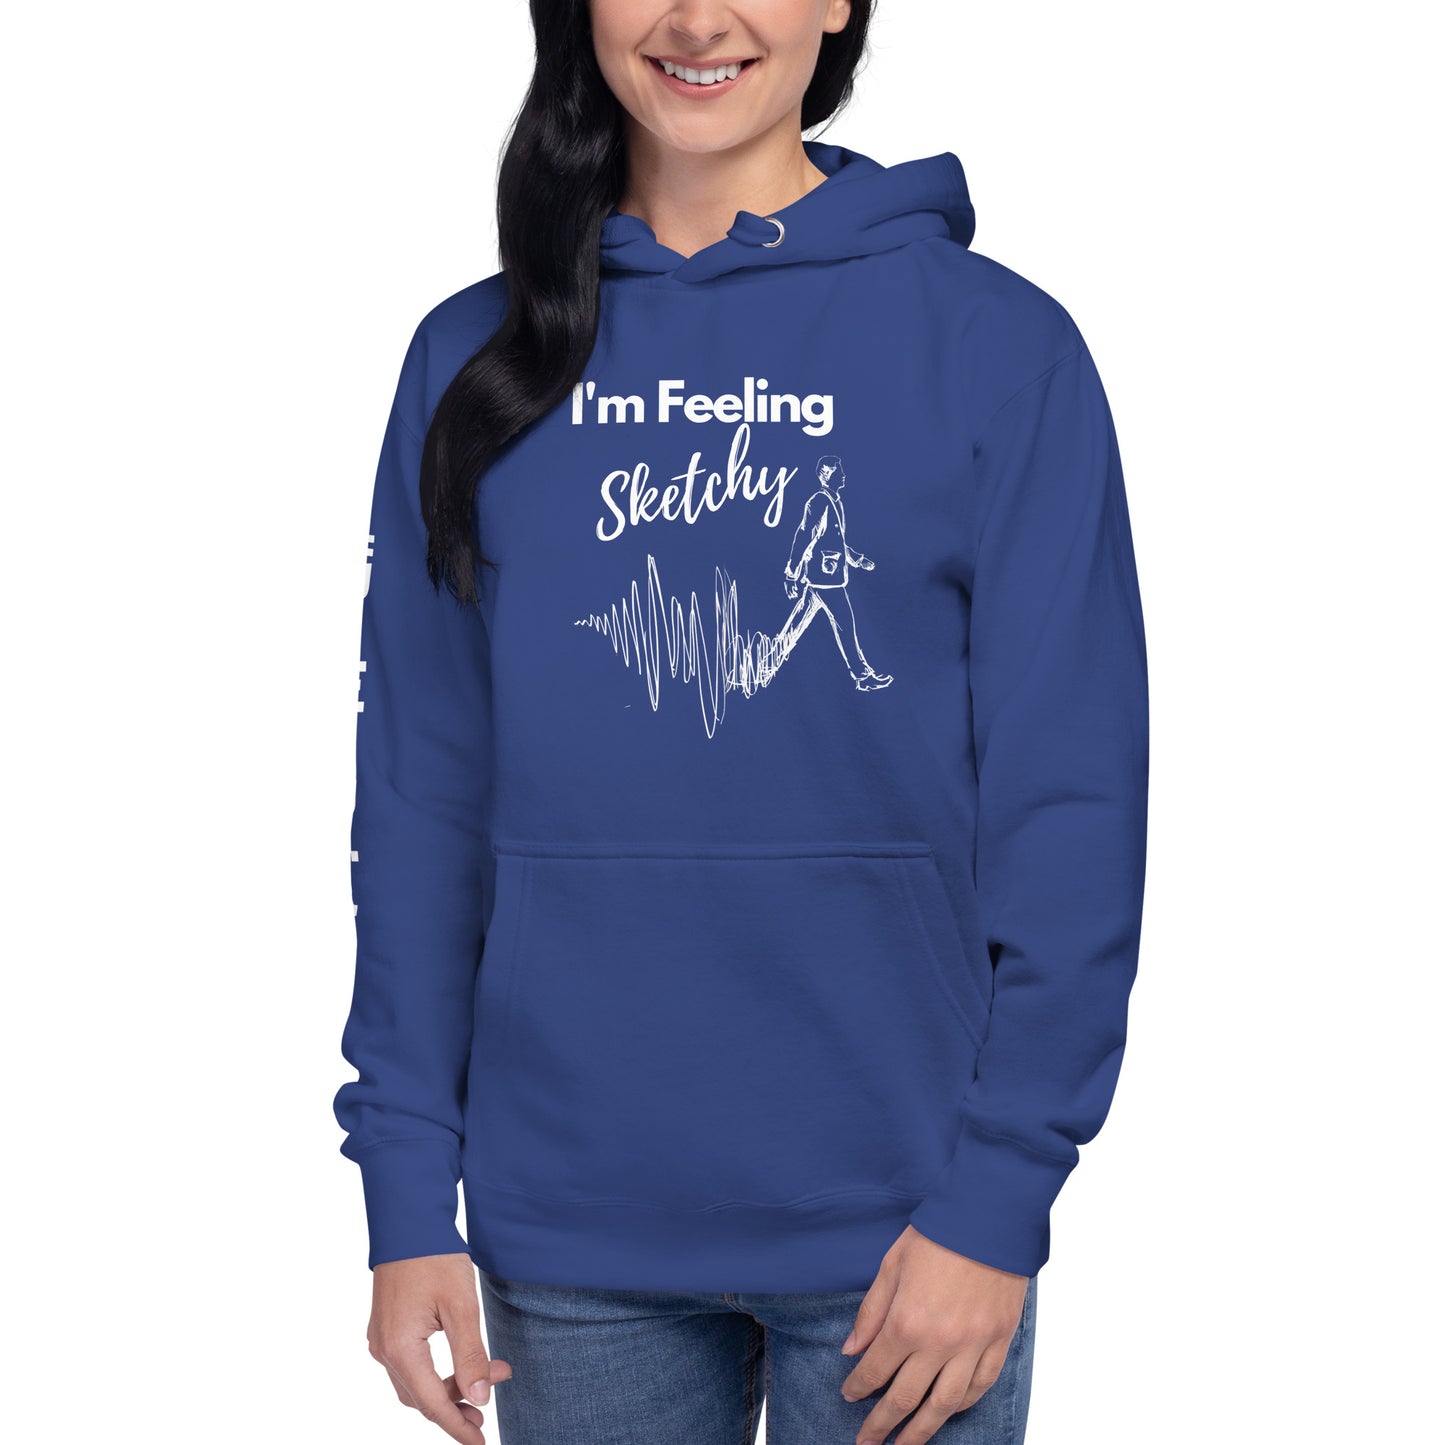 "I'm Feeling Sketchy" Artist Unisex Hoodie - great gift idea for architects